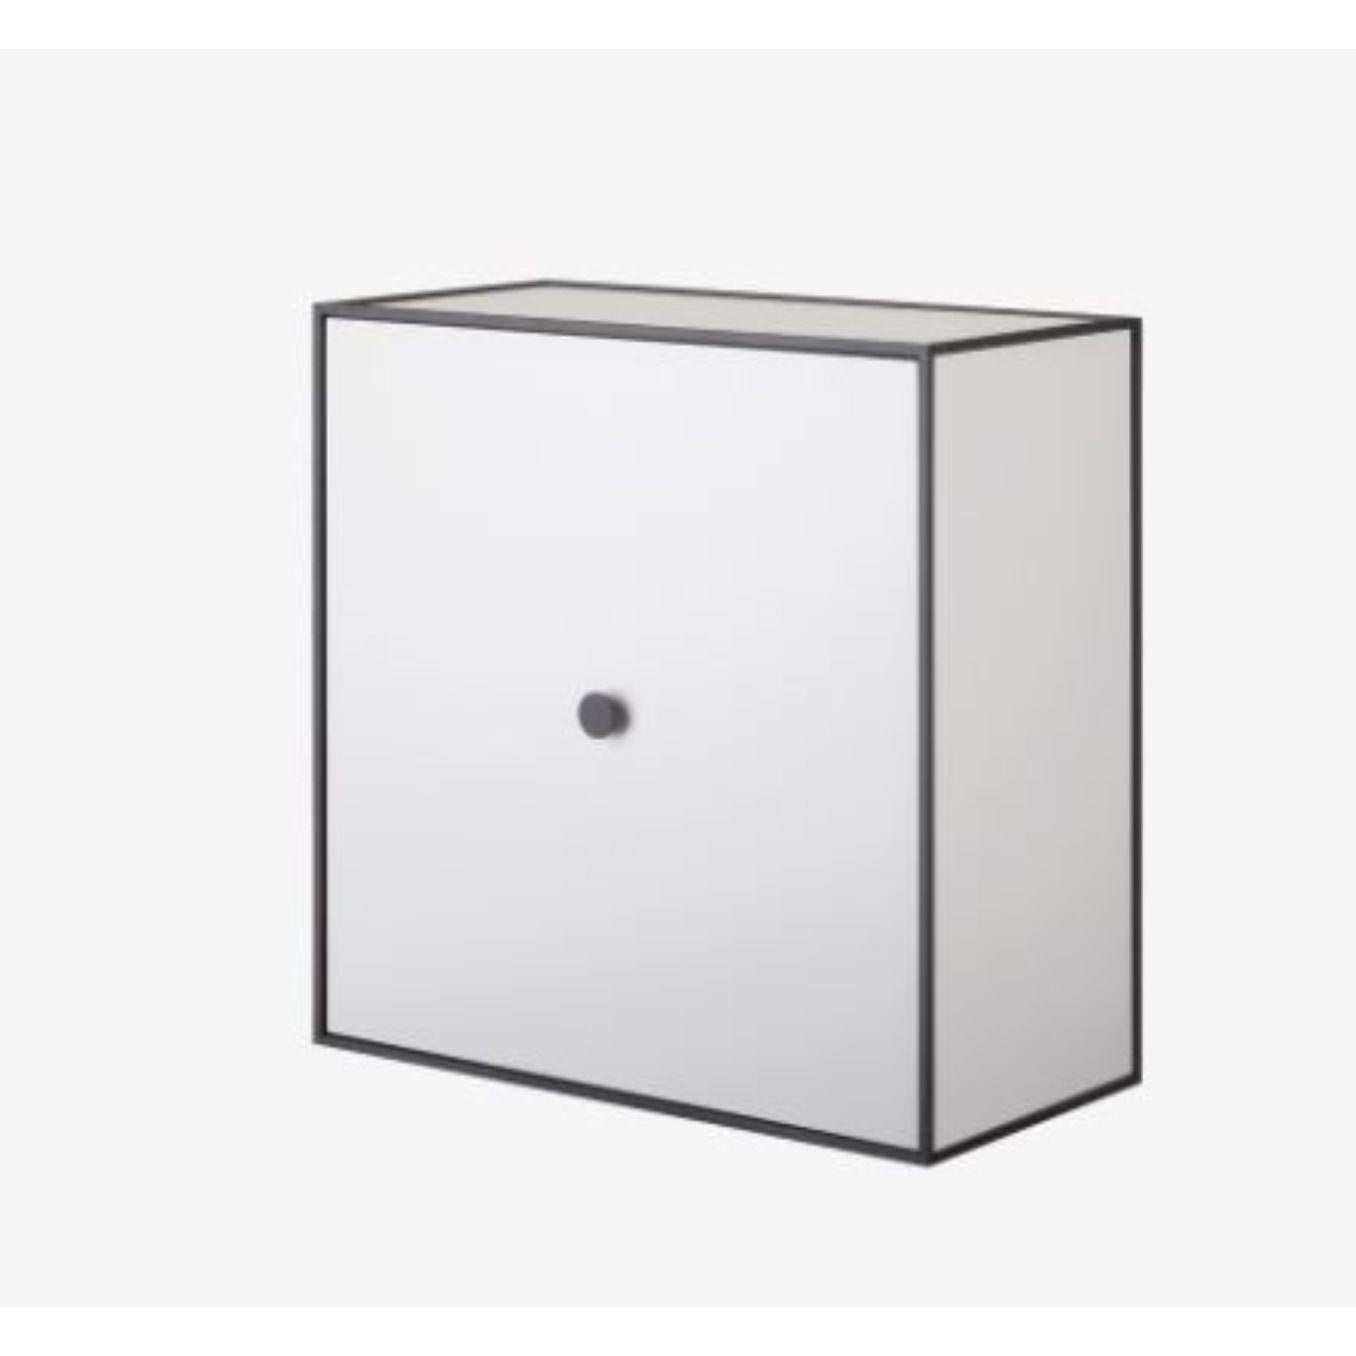 42-Light grey frame box with door by Lassen
Dimensions: D 42 x W 21 x H 42 cm 
Materials: Finér, Melamin, Melamin, Melamine, Metal, Veneer
Also available in different colours and dimensions.
Weight: 11.50 Kg

By Lassen is a Danish design brand